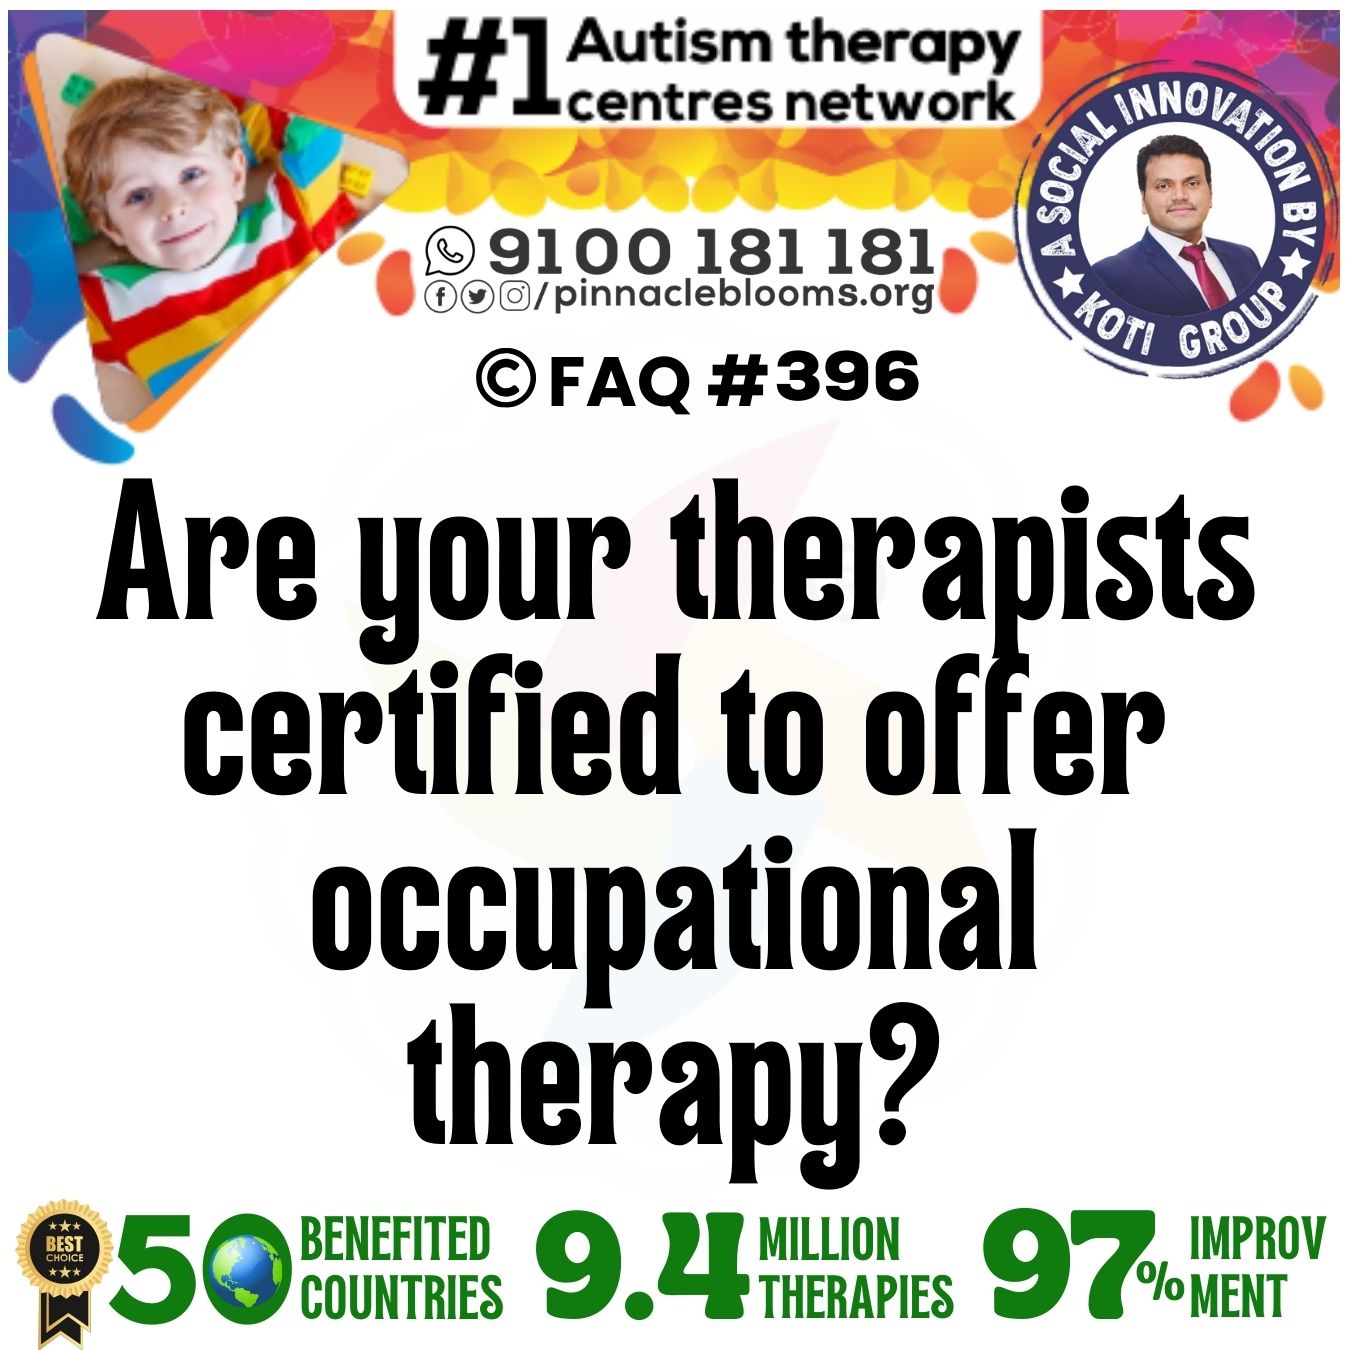 Are your therapists certified to offer occupational therapy?